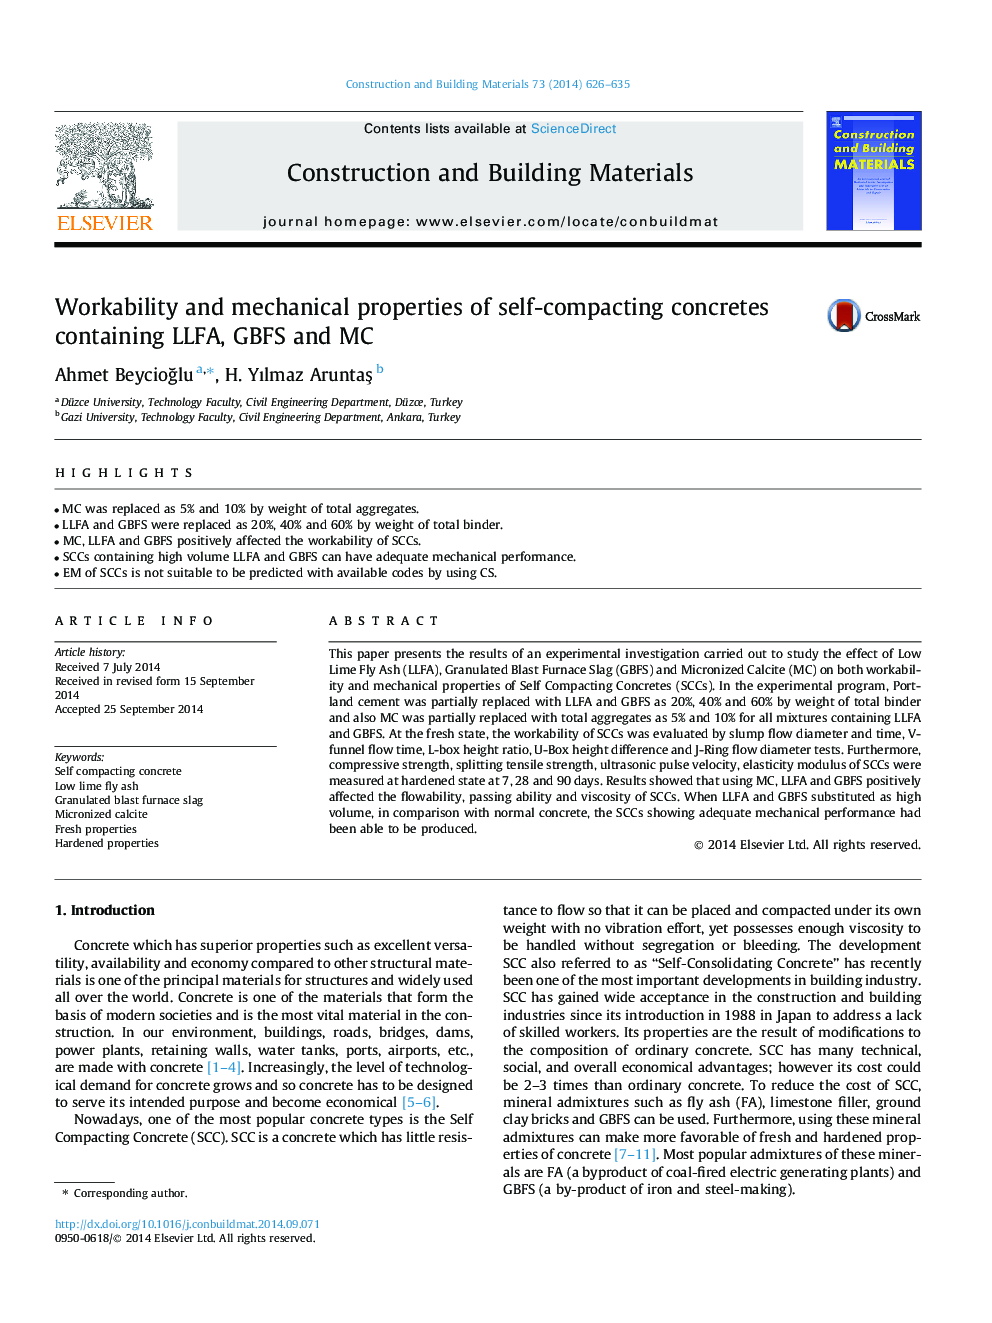 Workability and mechanical properties of self-compacting concretes containing LLFA, GBFS and MC